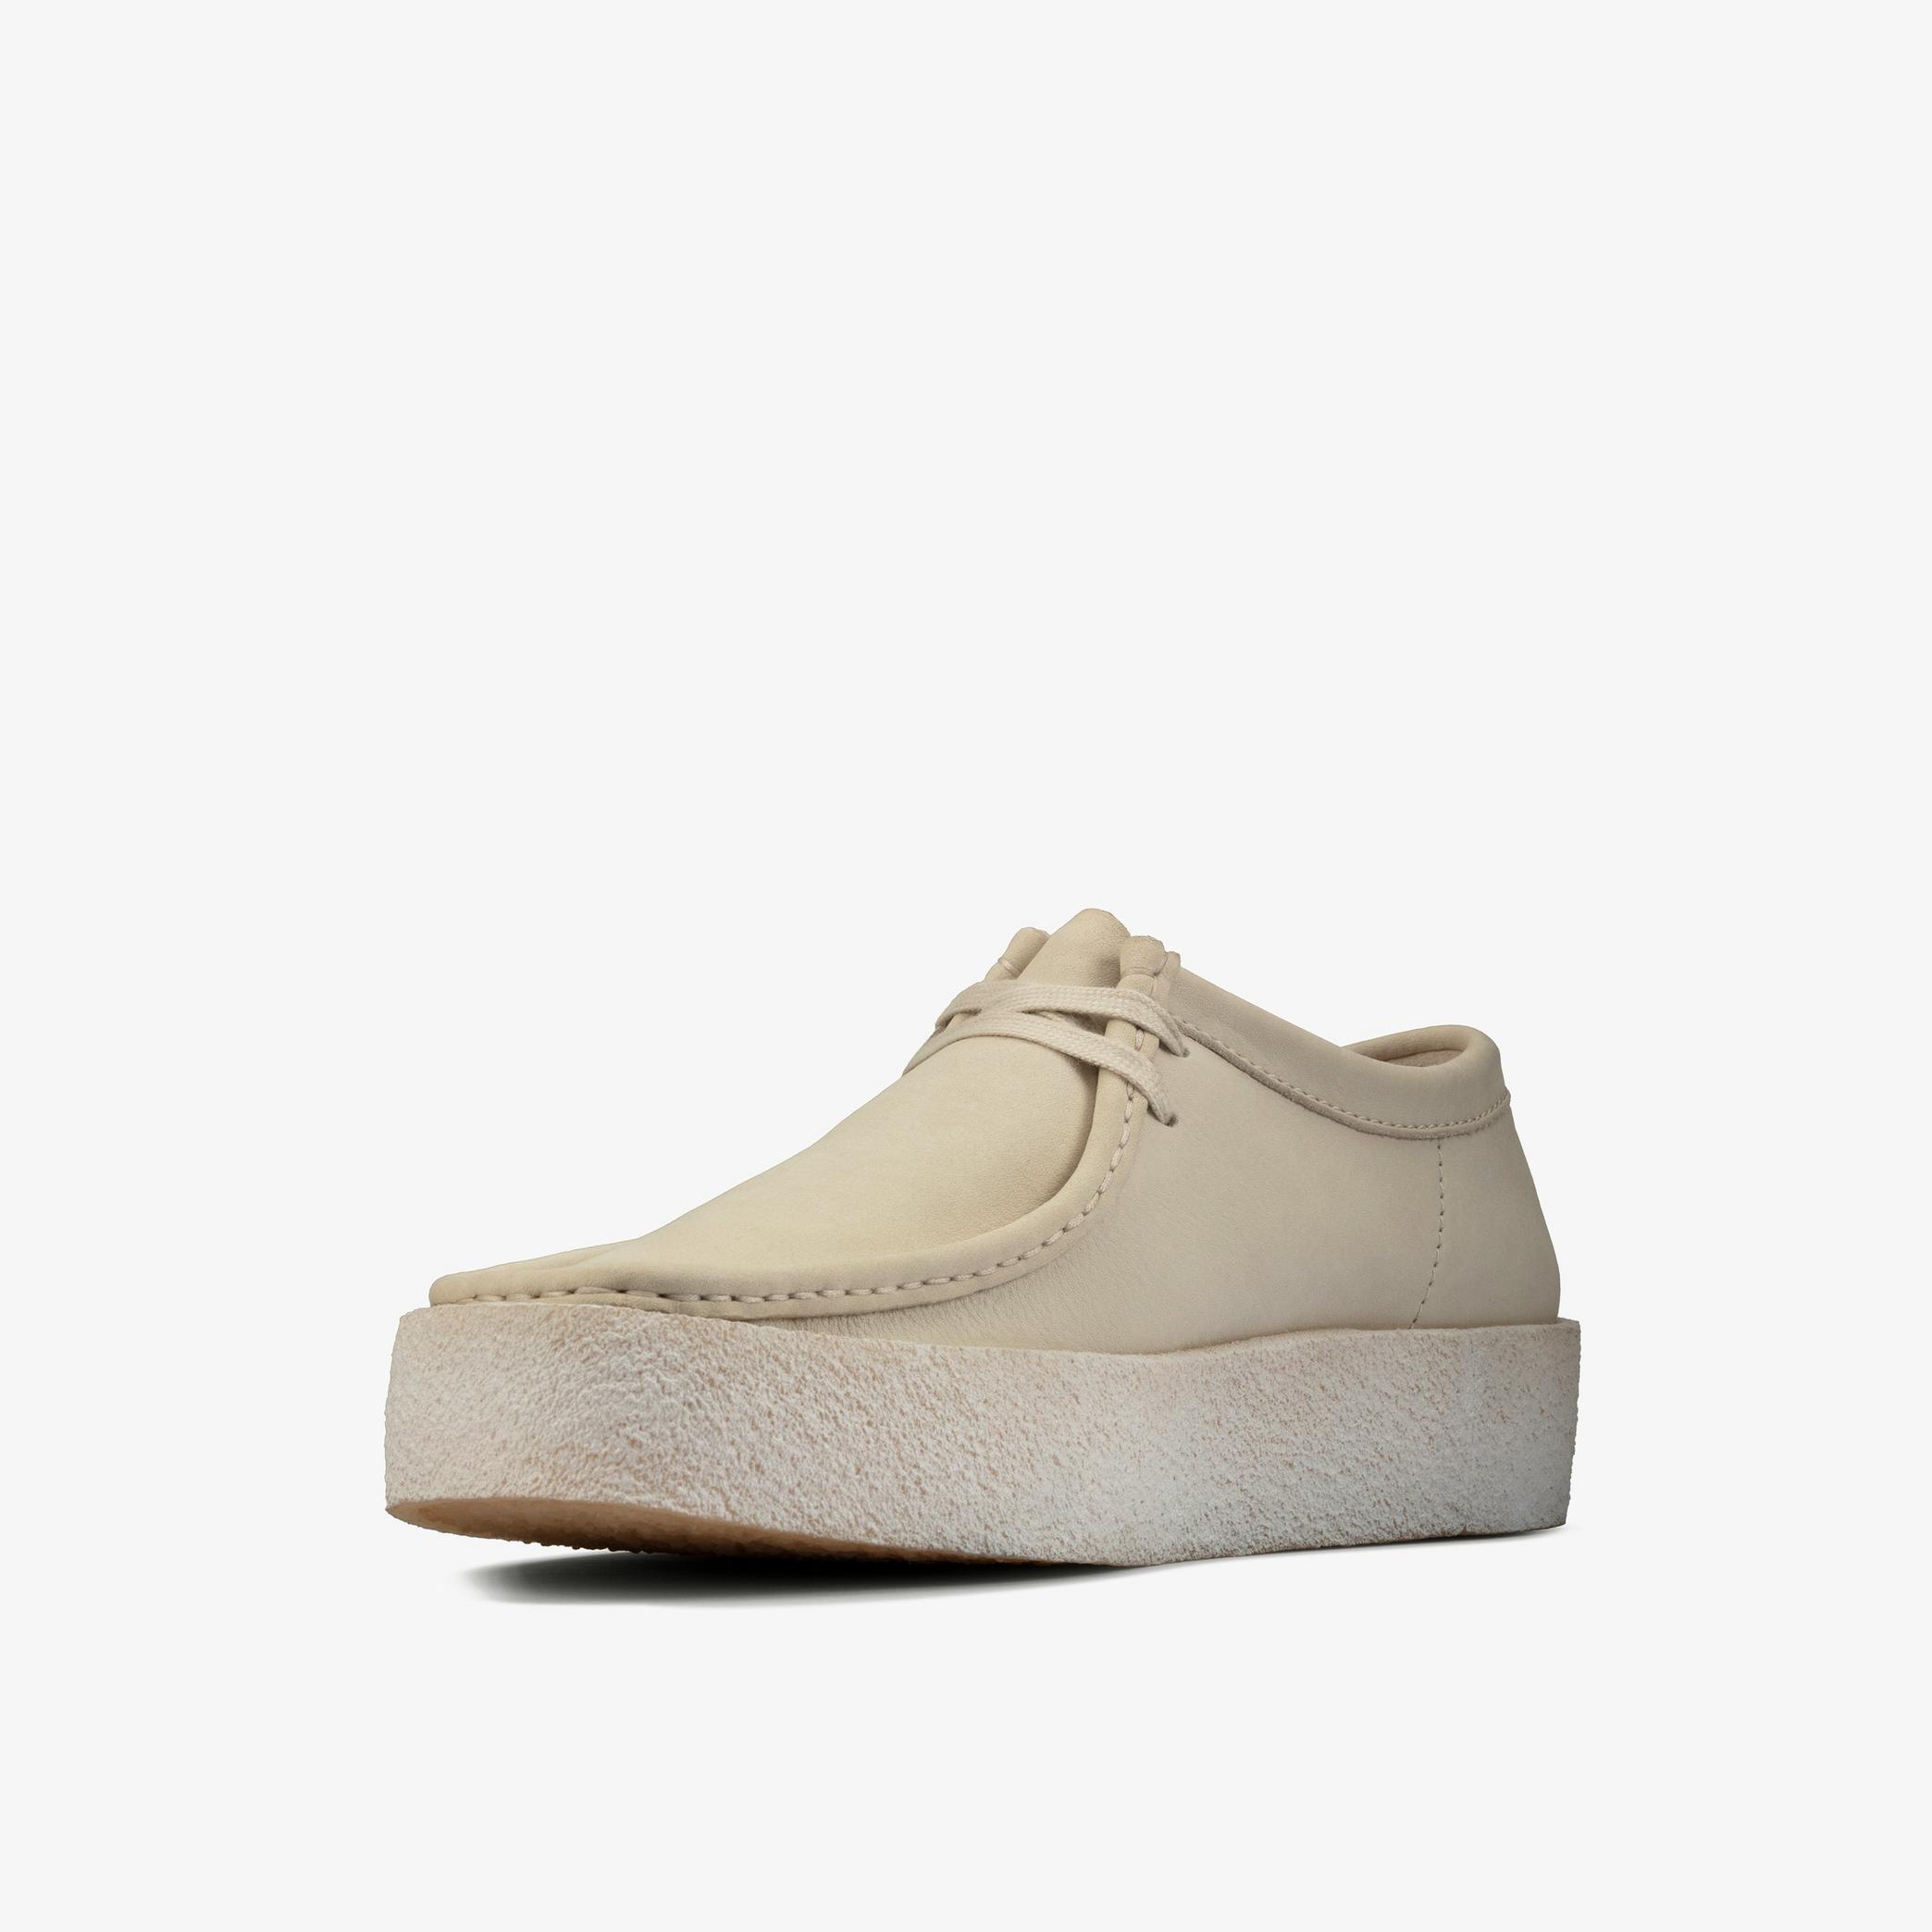 Wallabee Cup White Nubuck Wallabee, view 4 of 7